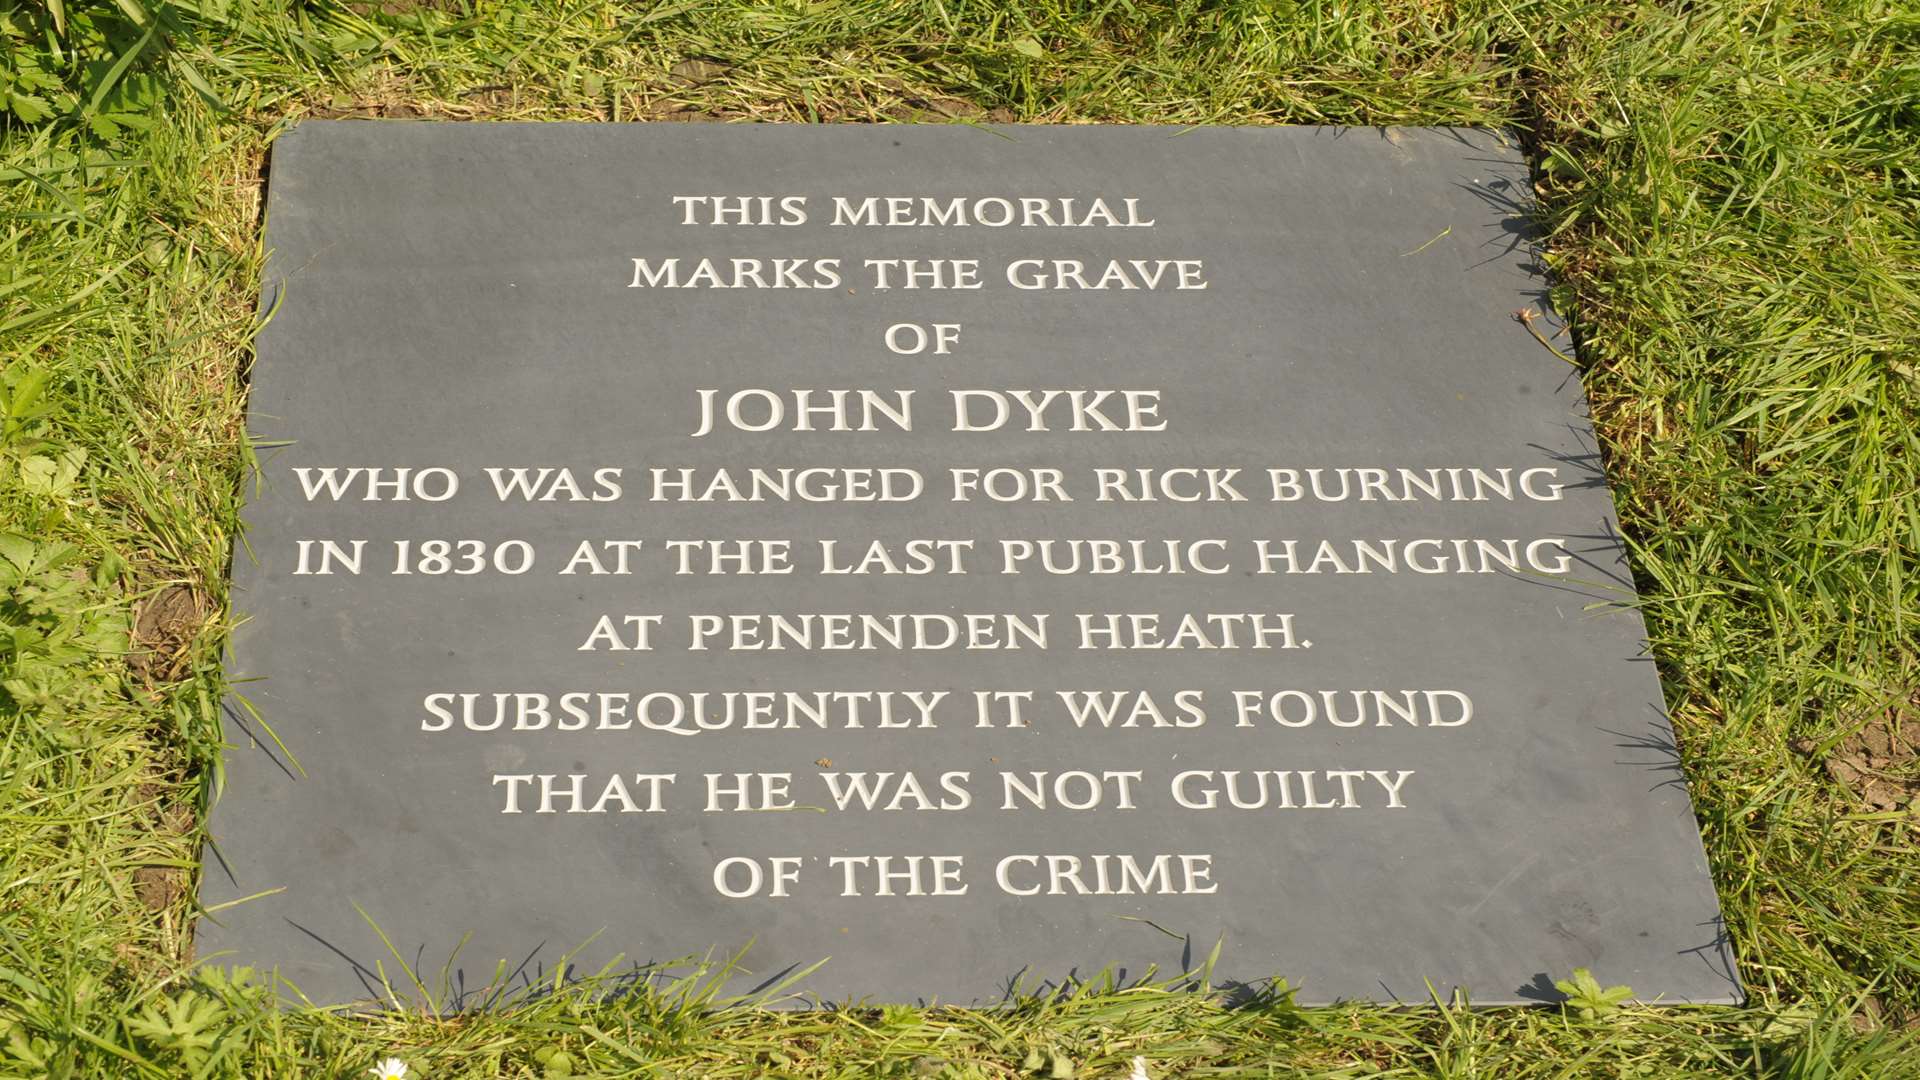 John Dyke is commemorated by a plaque at Holy Cross Church, Bearsted